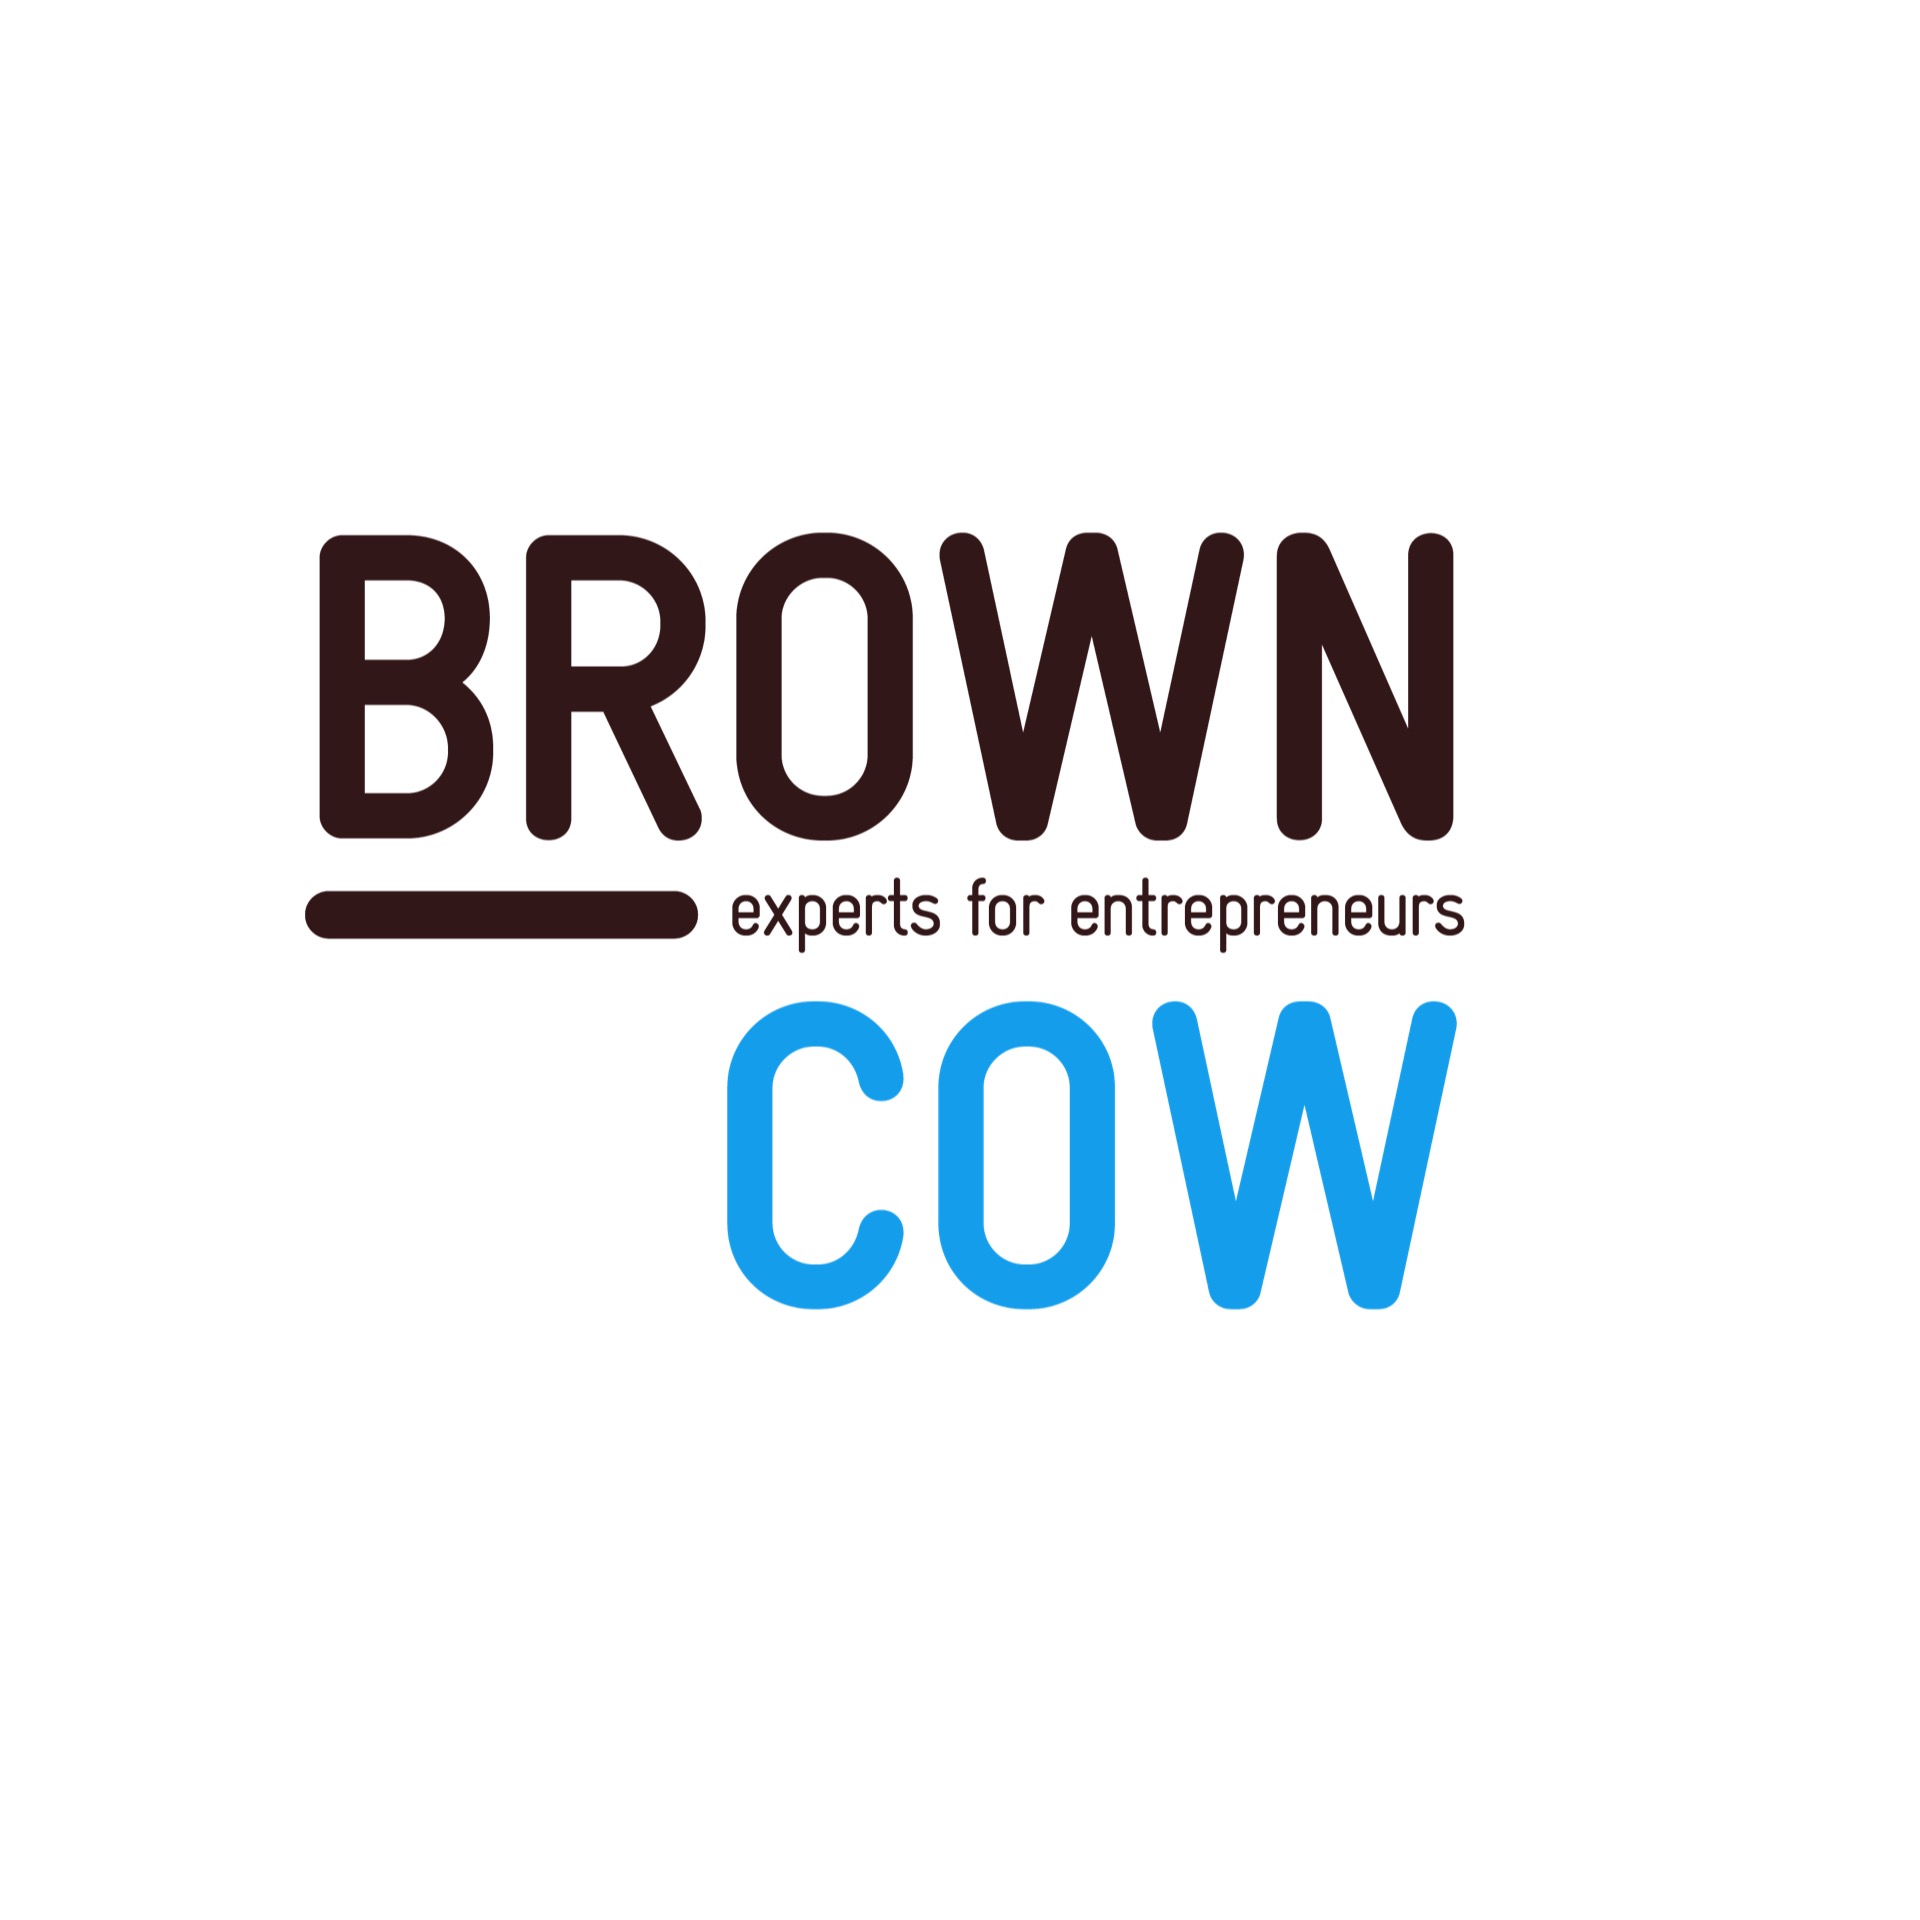 BrownCow